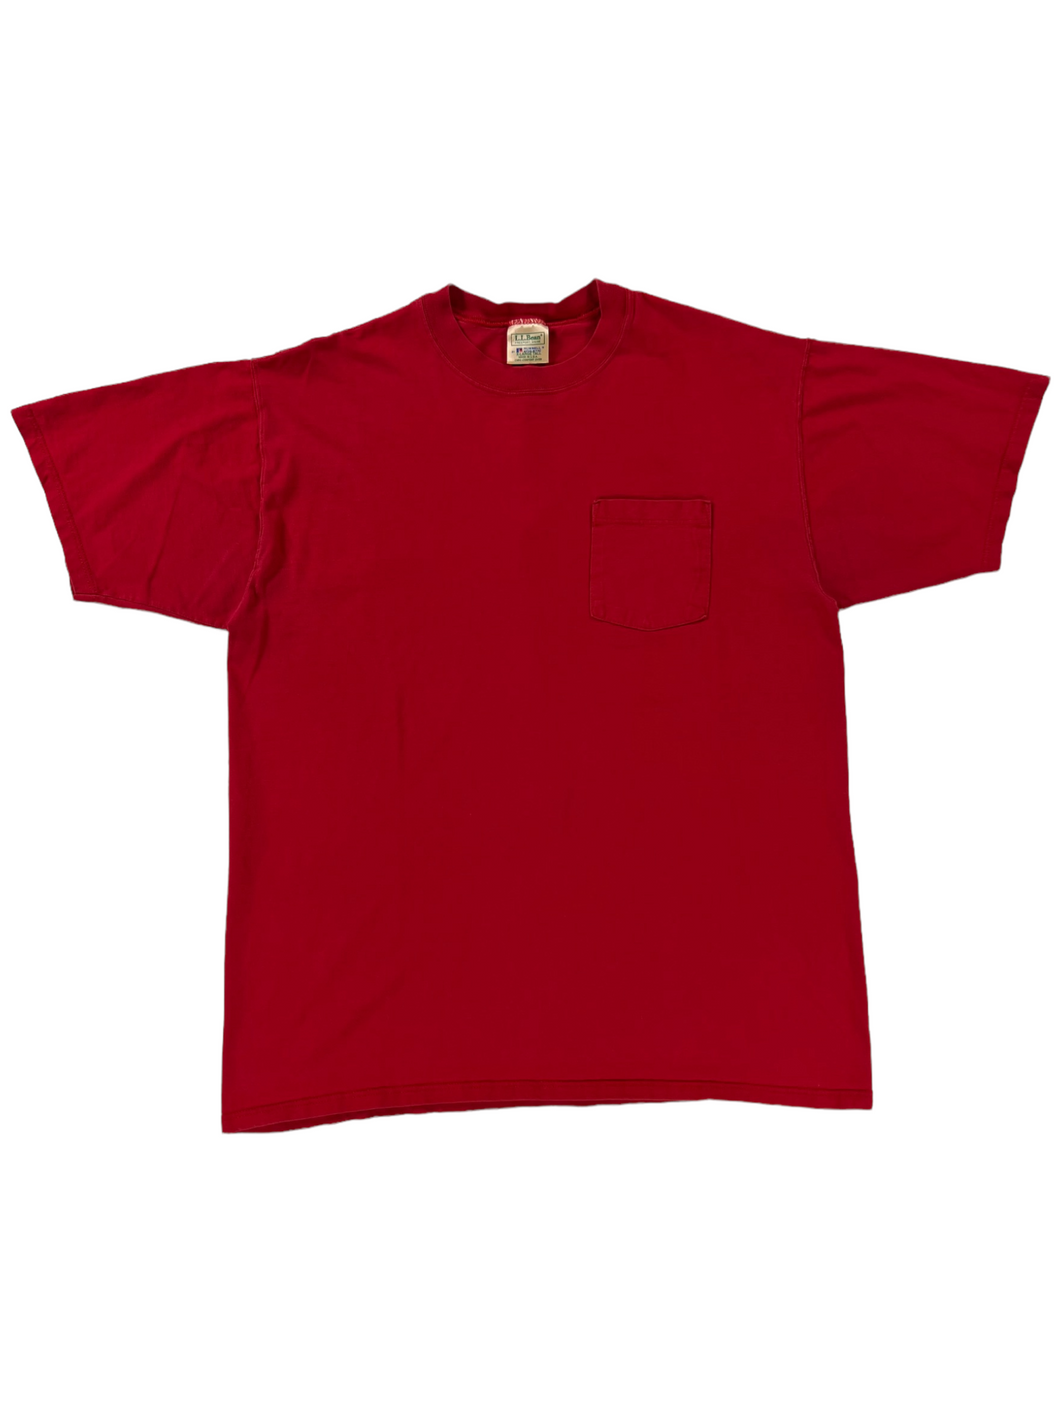 Vintage 90s LL Bean Russell Athletic red pocket tee (XL)